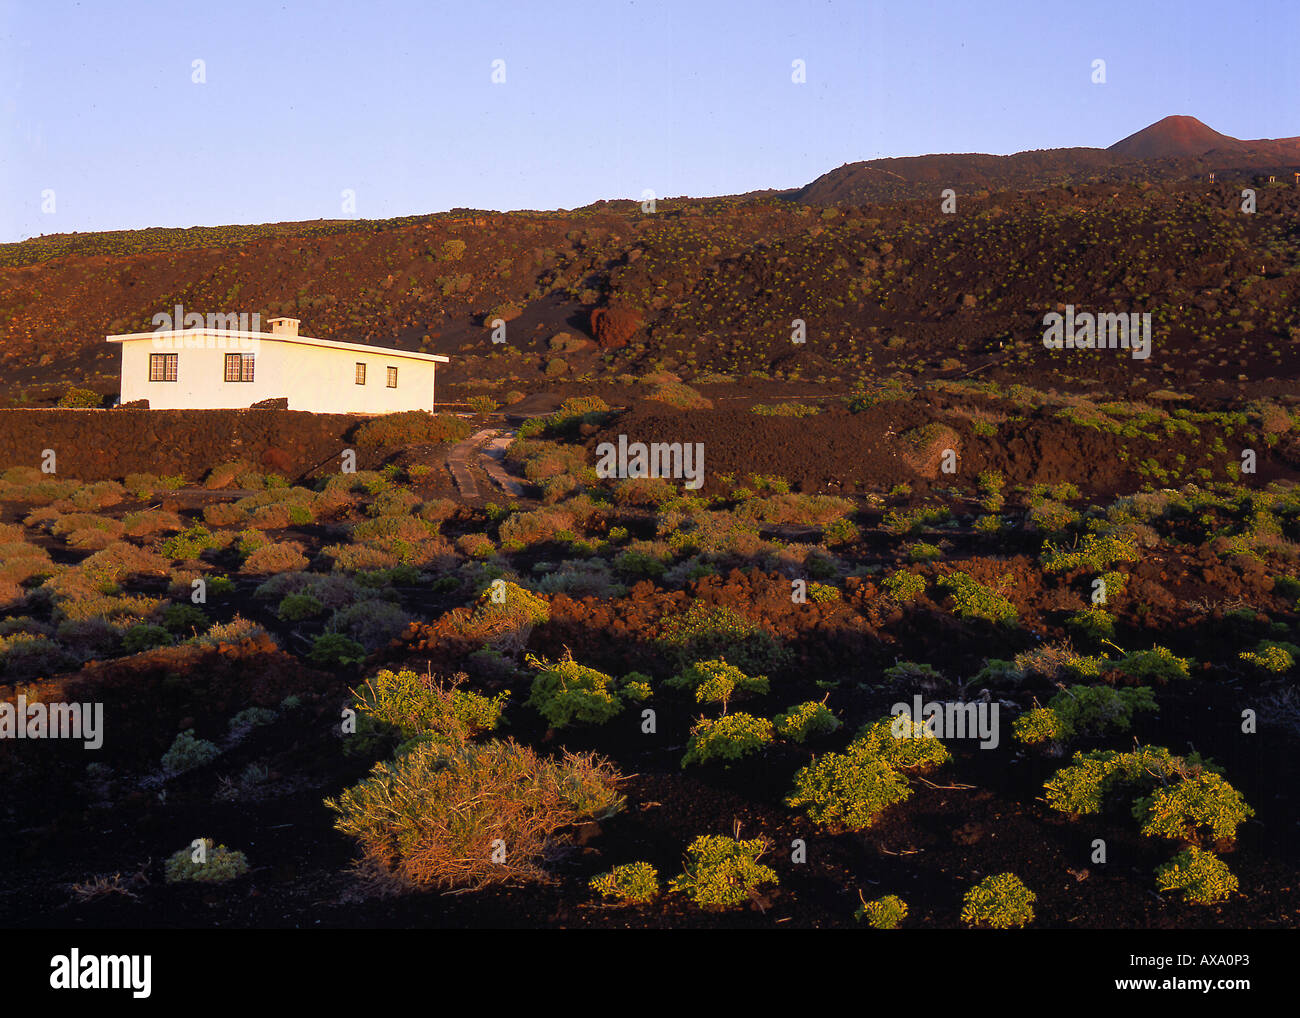 Volcanic landscape with country house, Fuencaliente, La Palma, Canary Islands, Spain Stock Photo